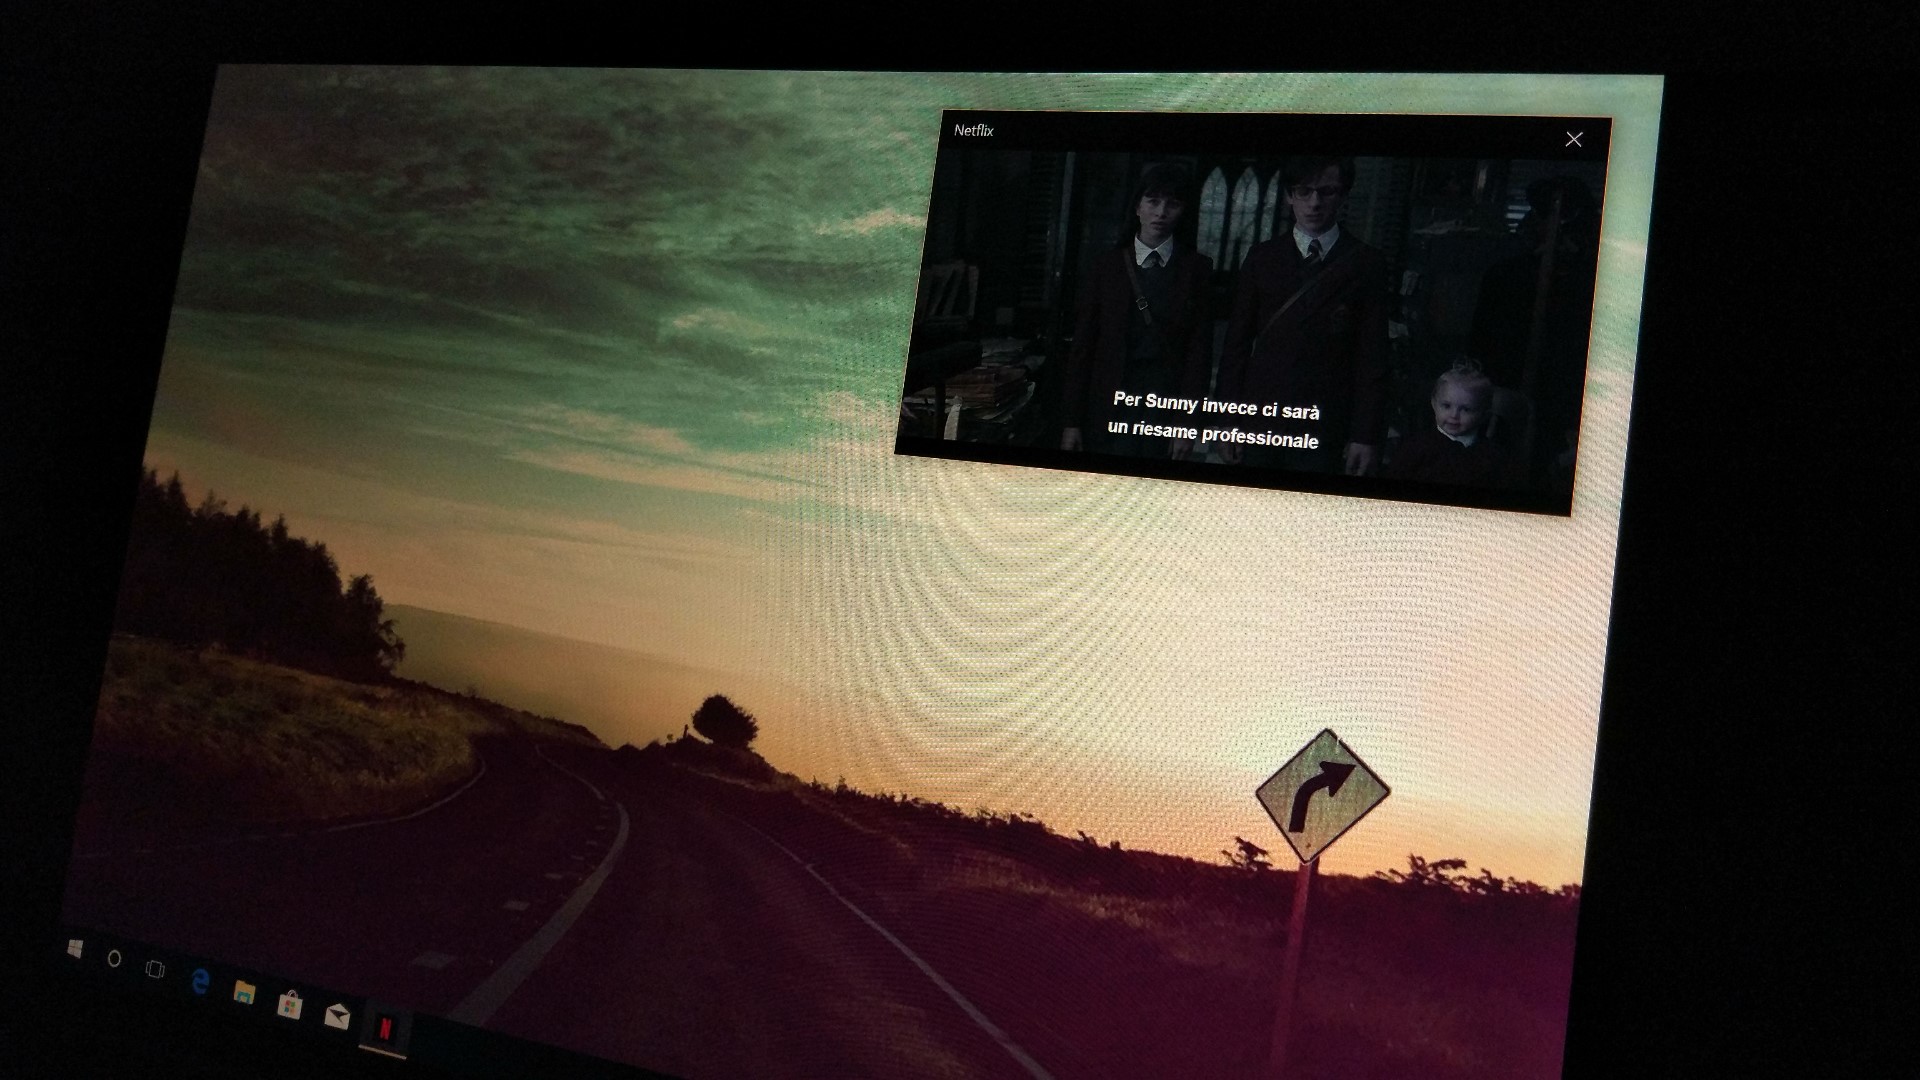 Netflix Windows 10 Picture-in-Picture